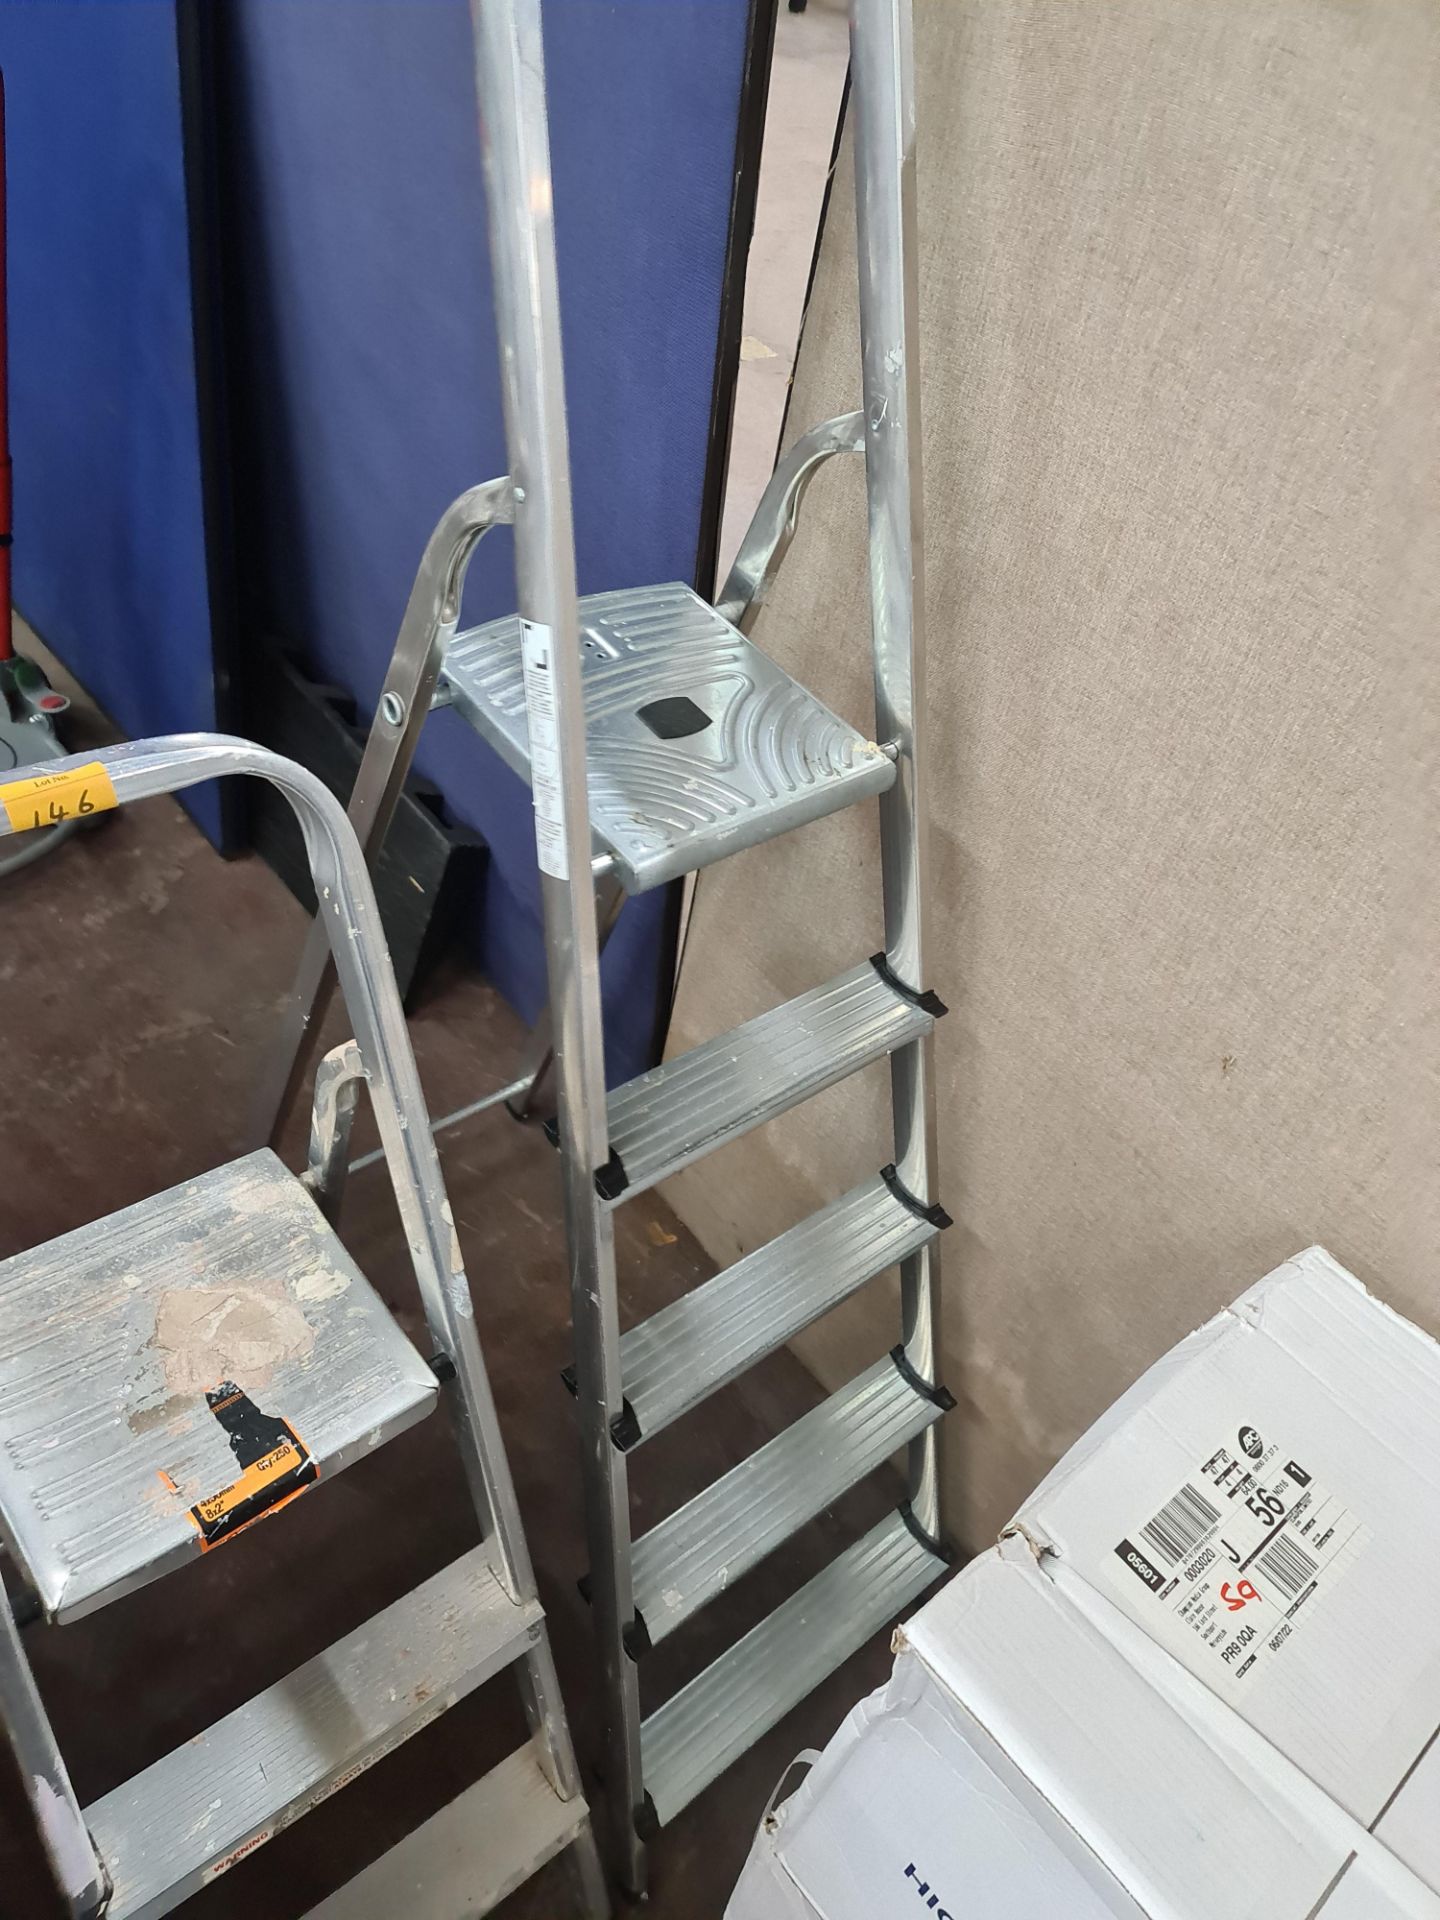 2 sets of step ladders, one small and one medium in size - Image 3 of 4